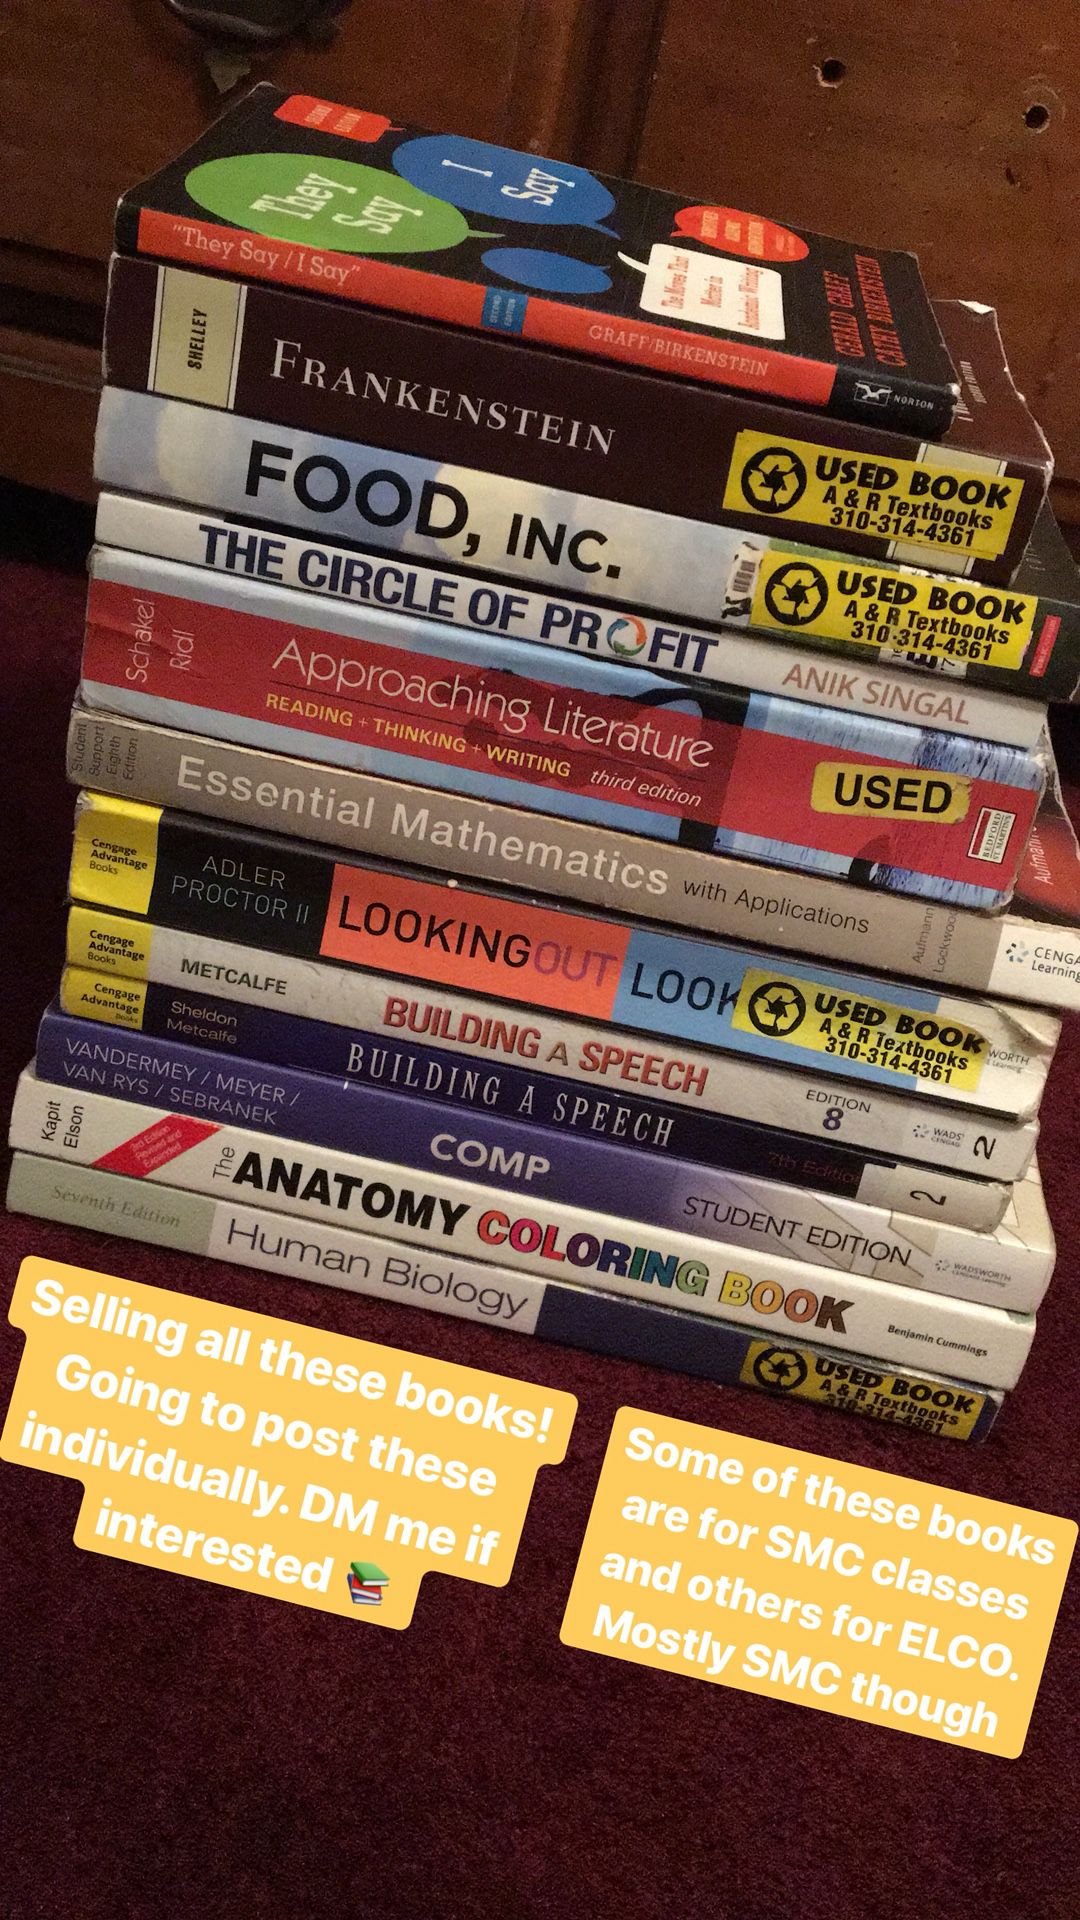 English, Biology, Anatomy, college books for SALE!